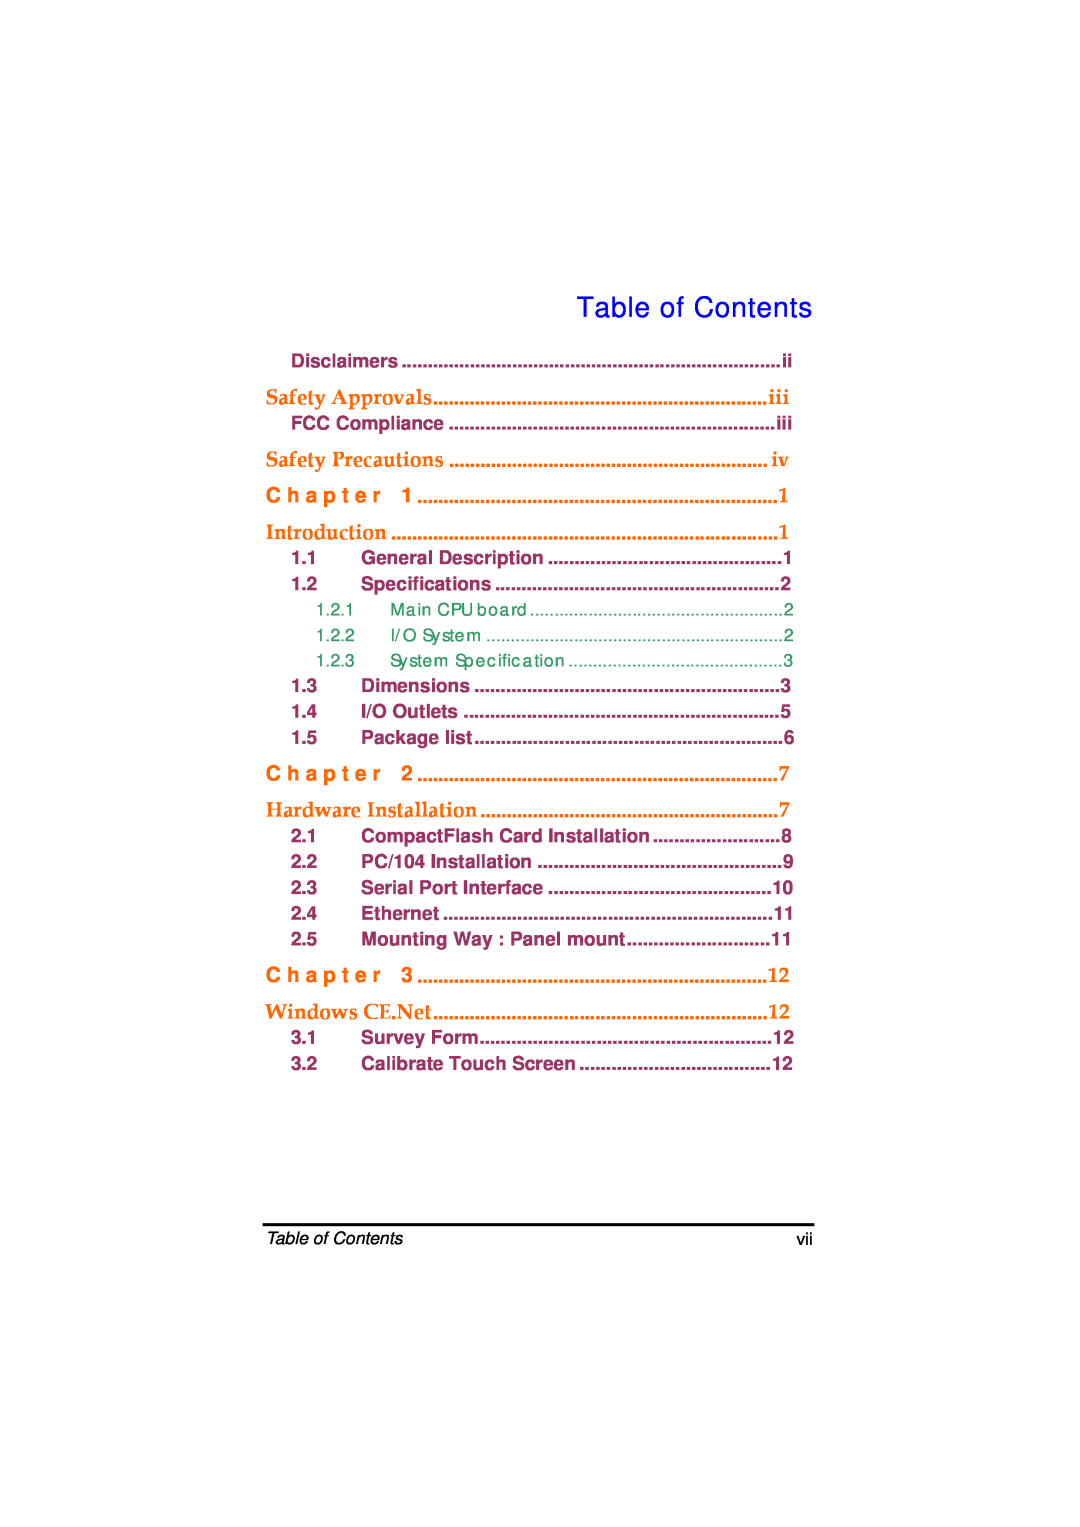 Acnodes FPC 8059 Table of Contents, C h a p t e r, Introduction, Safety Approvals, Safety Precautions, Windows CE.Net 